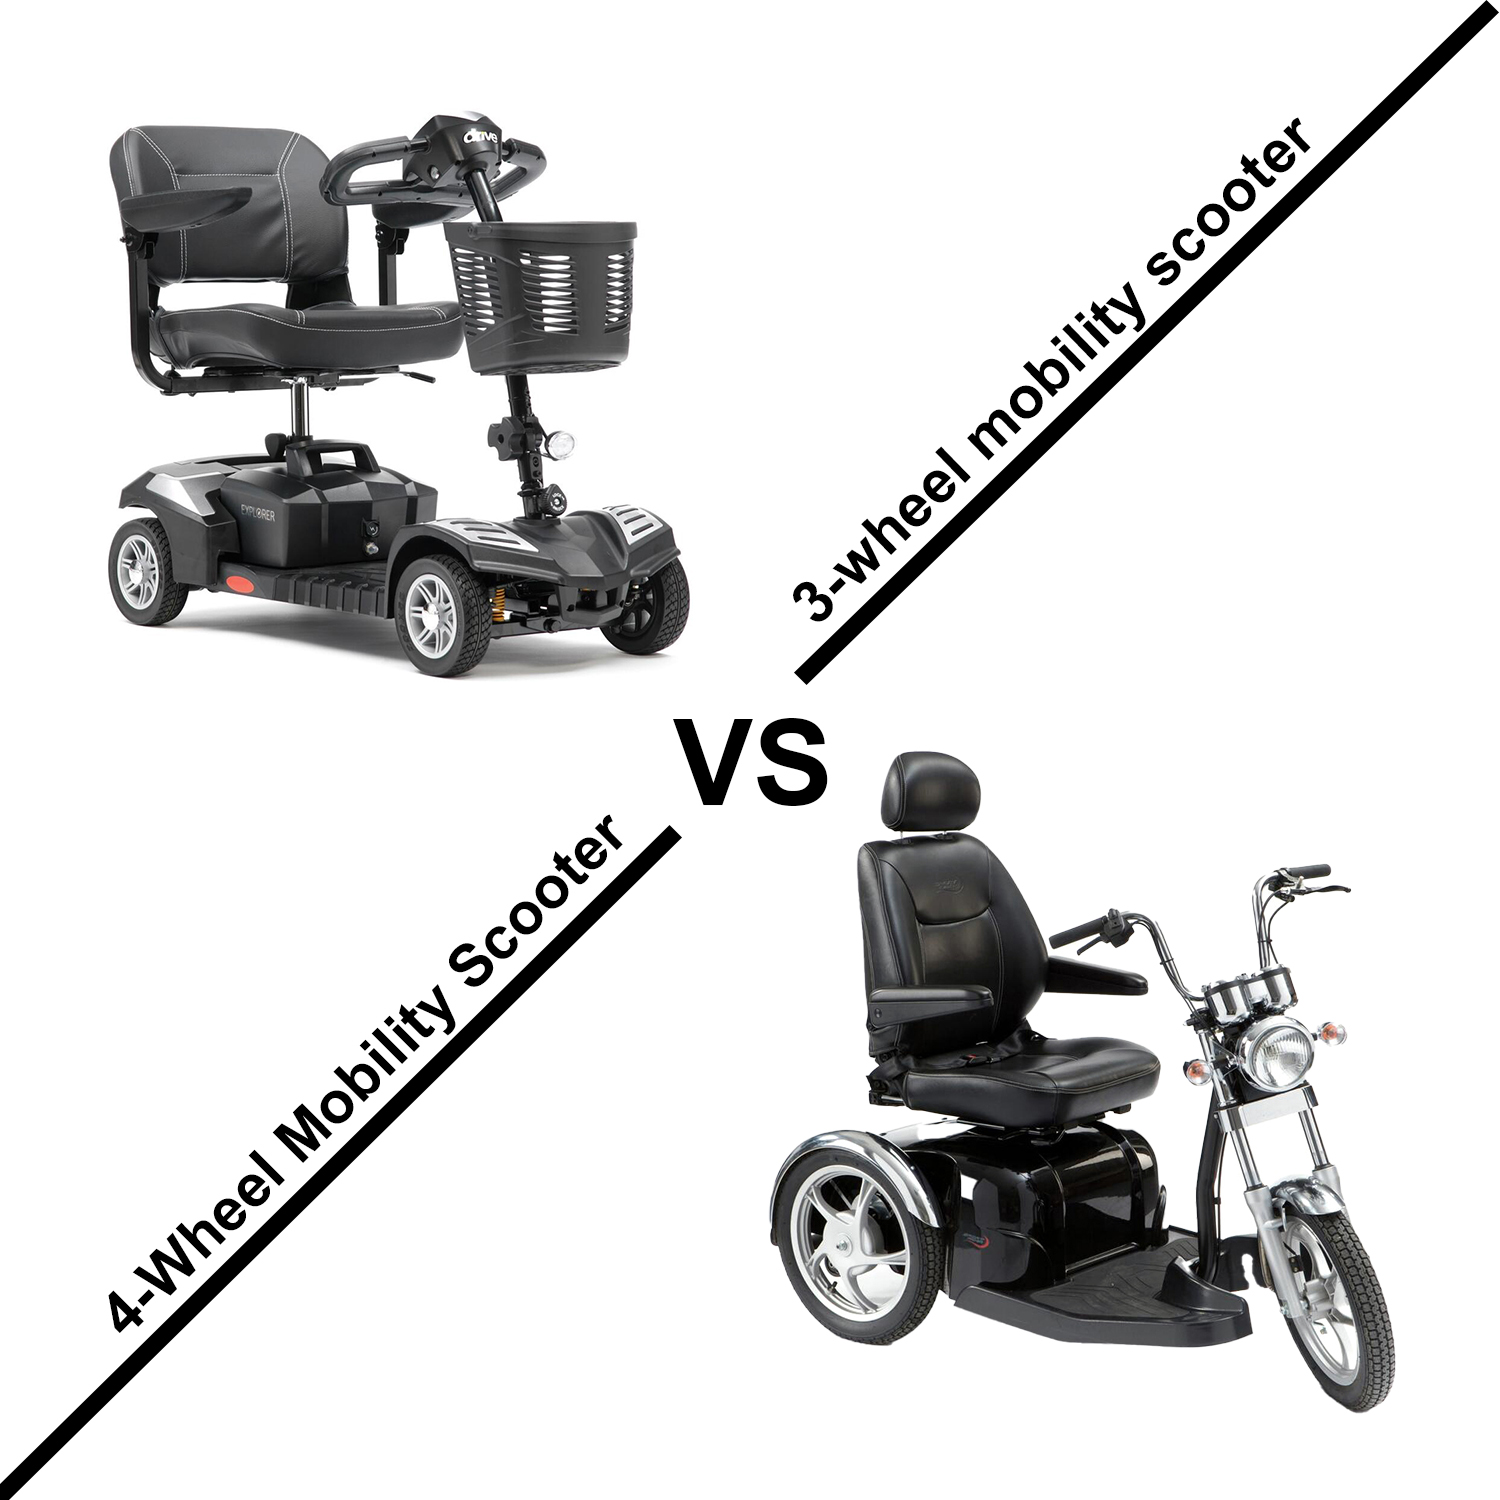 4 Wheel Mobility Scooters Vs 3 Wheel Mobility Scooters